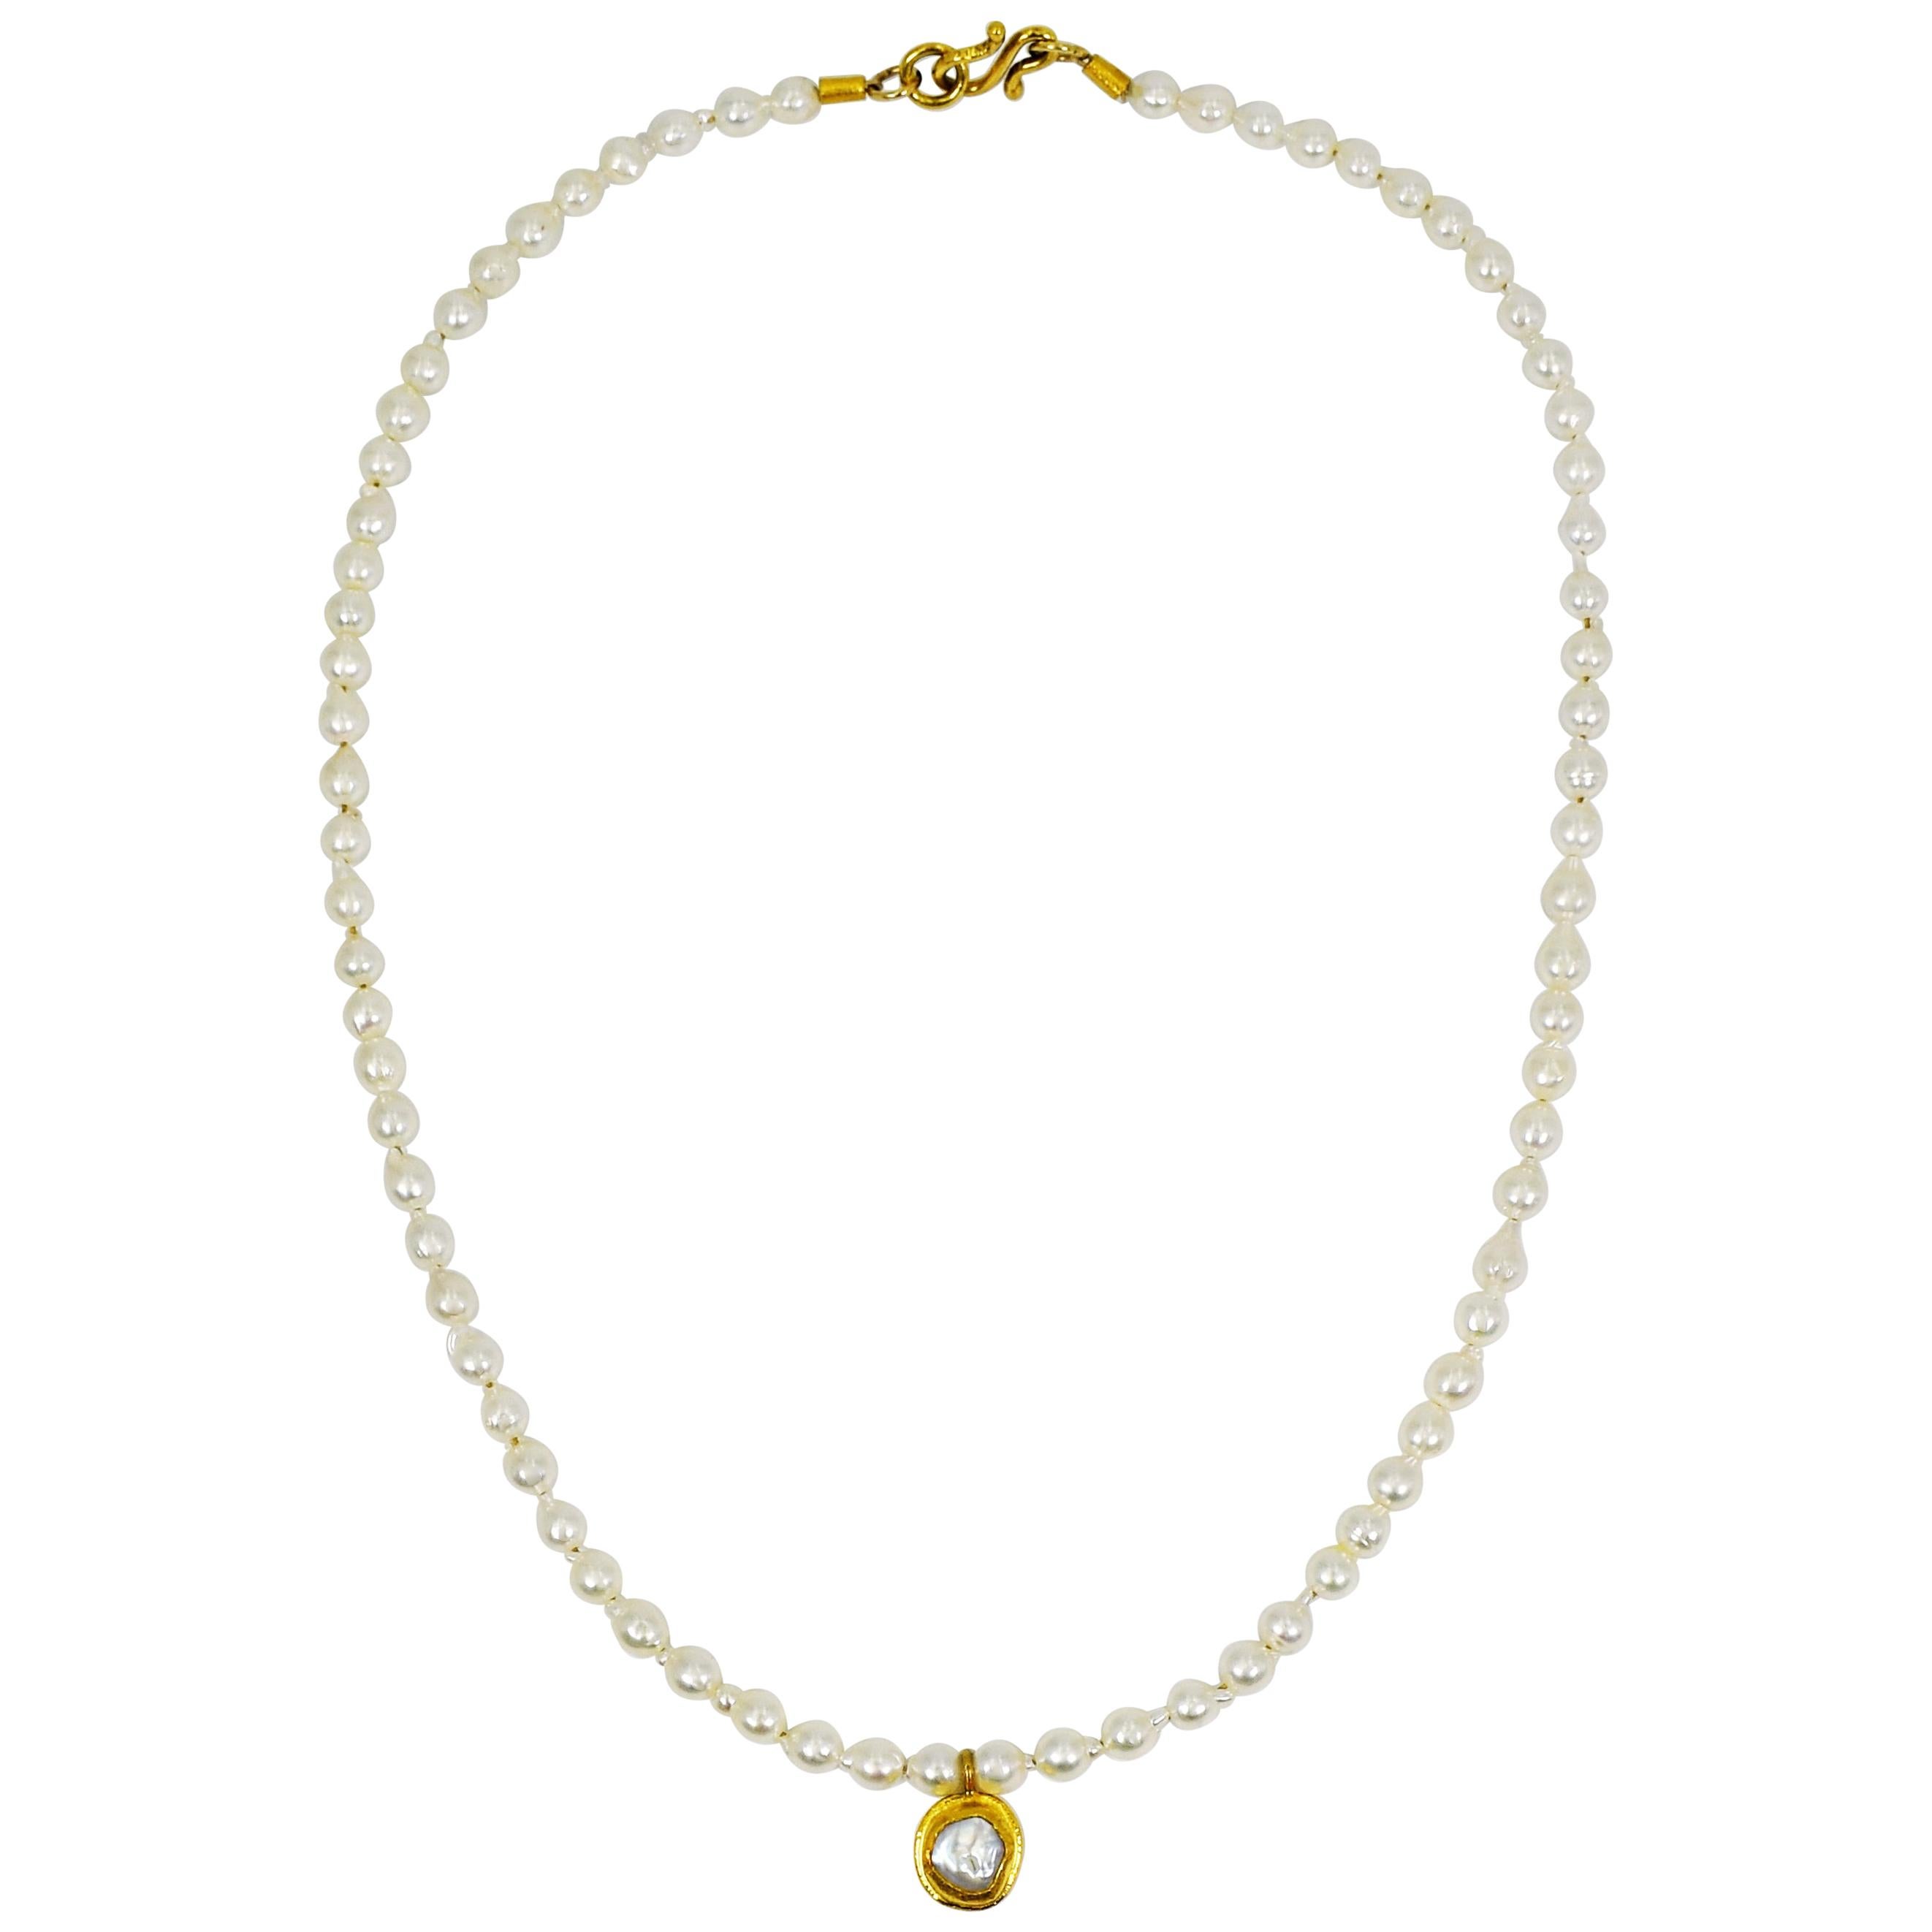 Freshwater Pearl and 22k yellow gold pendant on dainty, petite white Pearl strand beaded necklace. Necklace is 16 inches in length and is finished with a 22k gold hook closure. Contemporary, delicate update to the timeless, elegant style of Pearls.